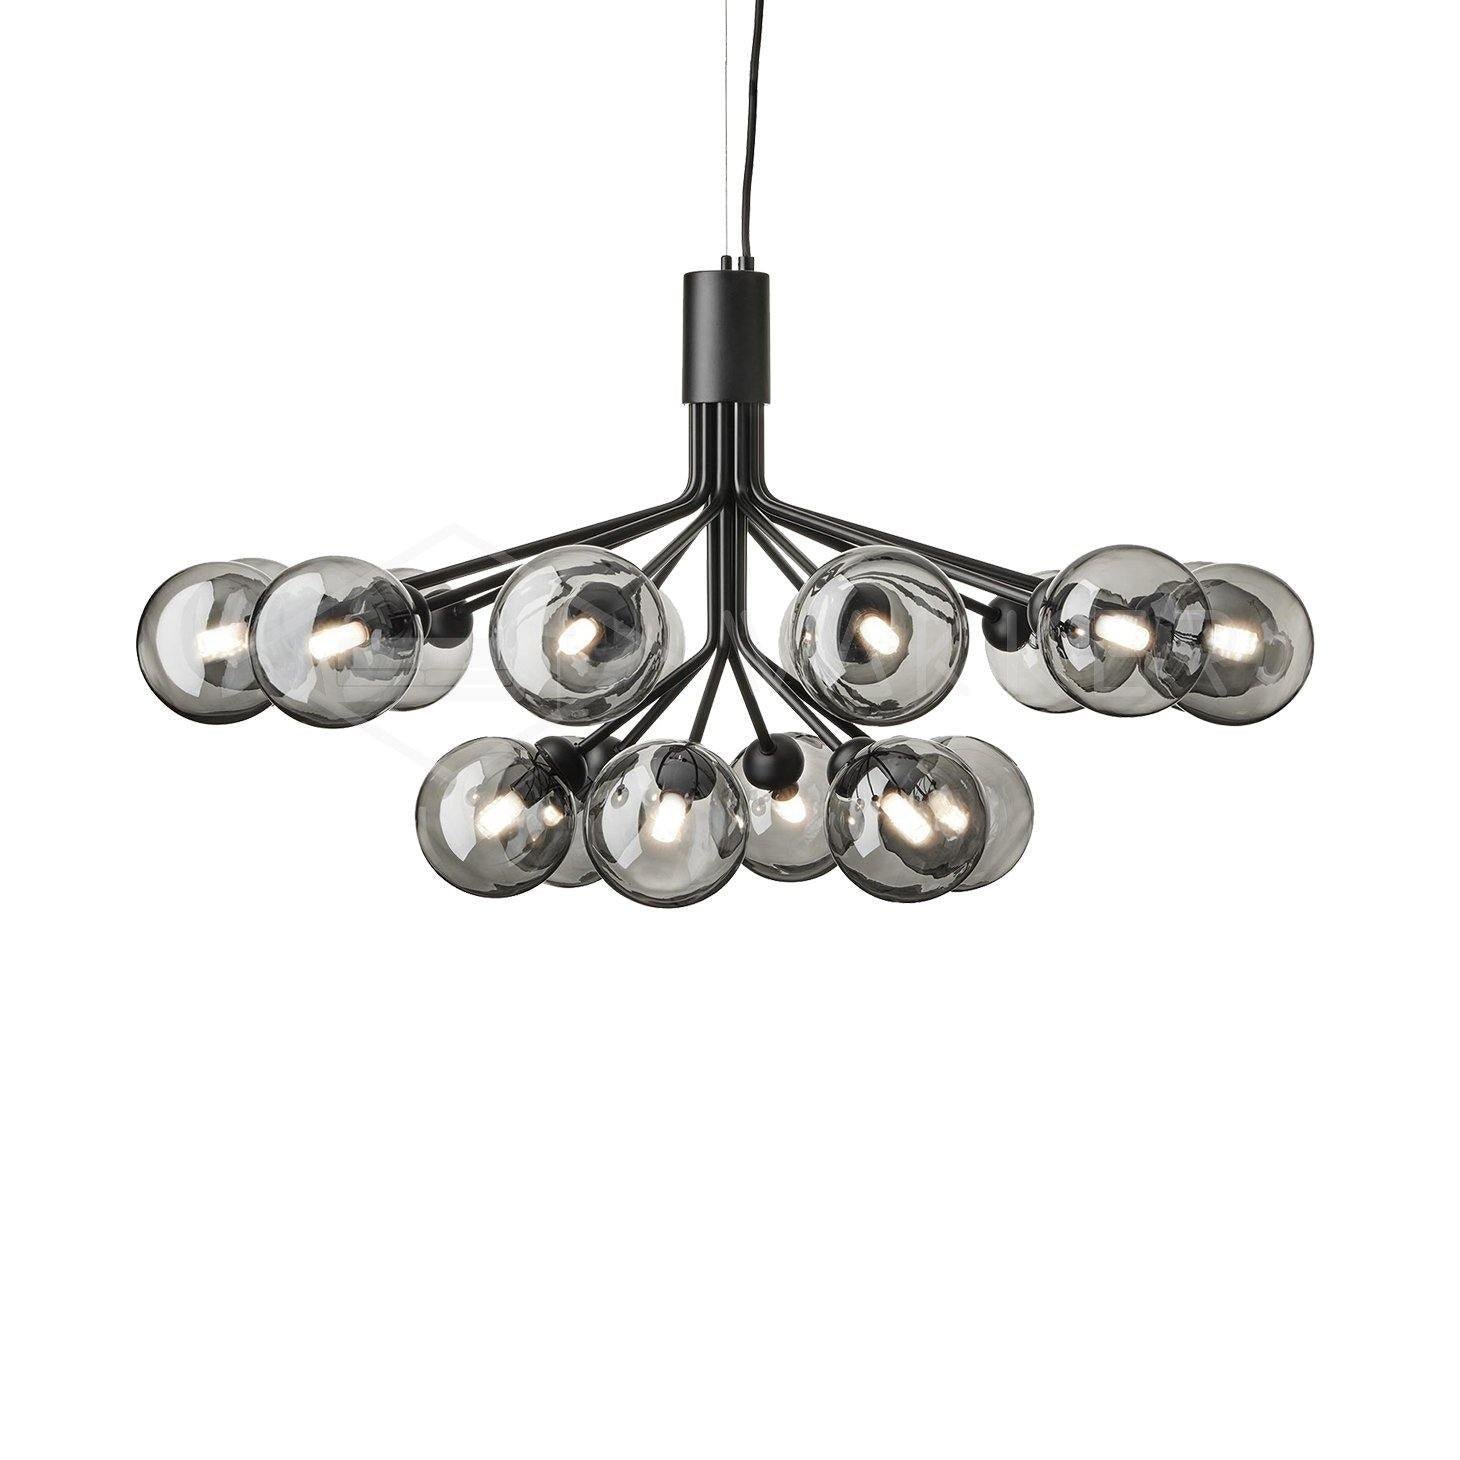 Black Smoky Apiales Chandeliers with 12heads, measuring approximately ∅ 31.5″ x H 19.7″ (Dia 80cm x H 50cm)